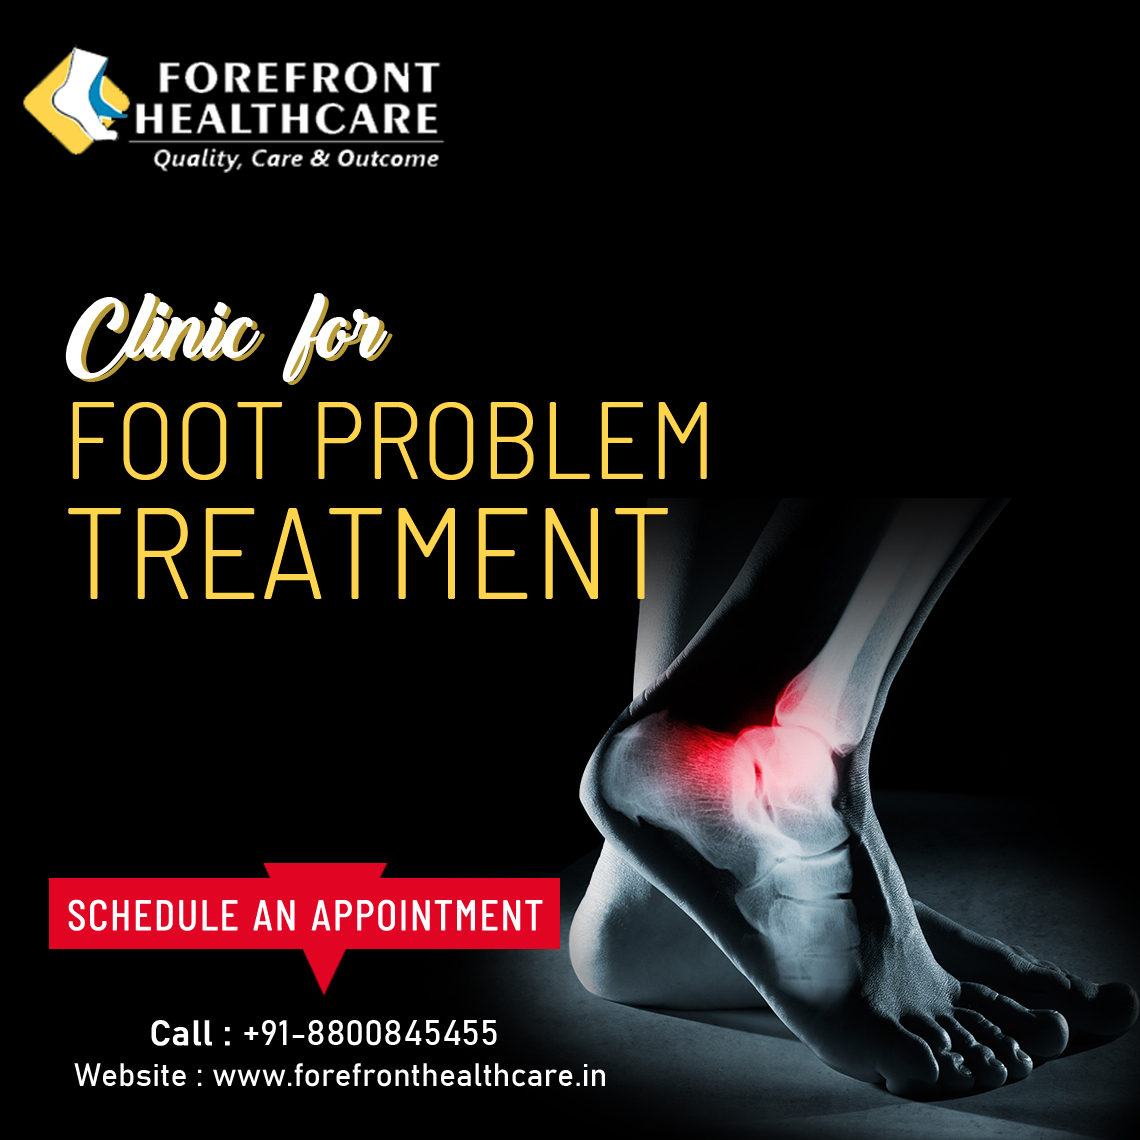 forefront healthcare clinic ghaziabad